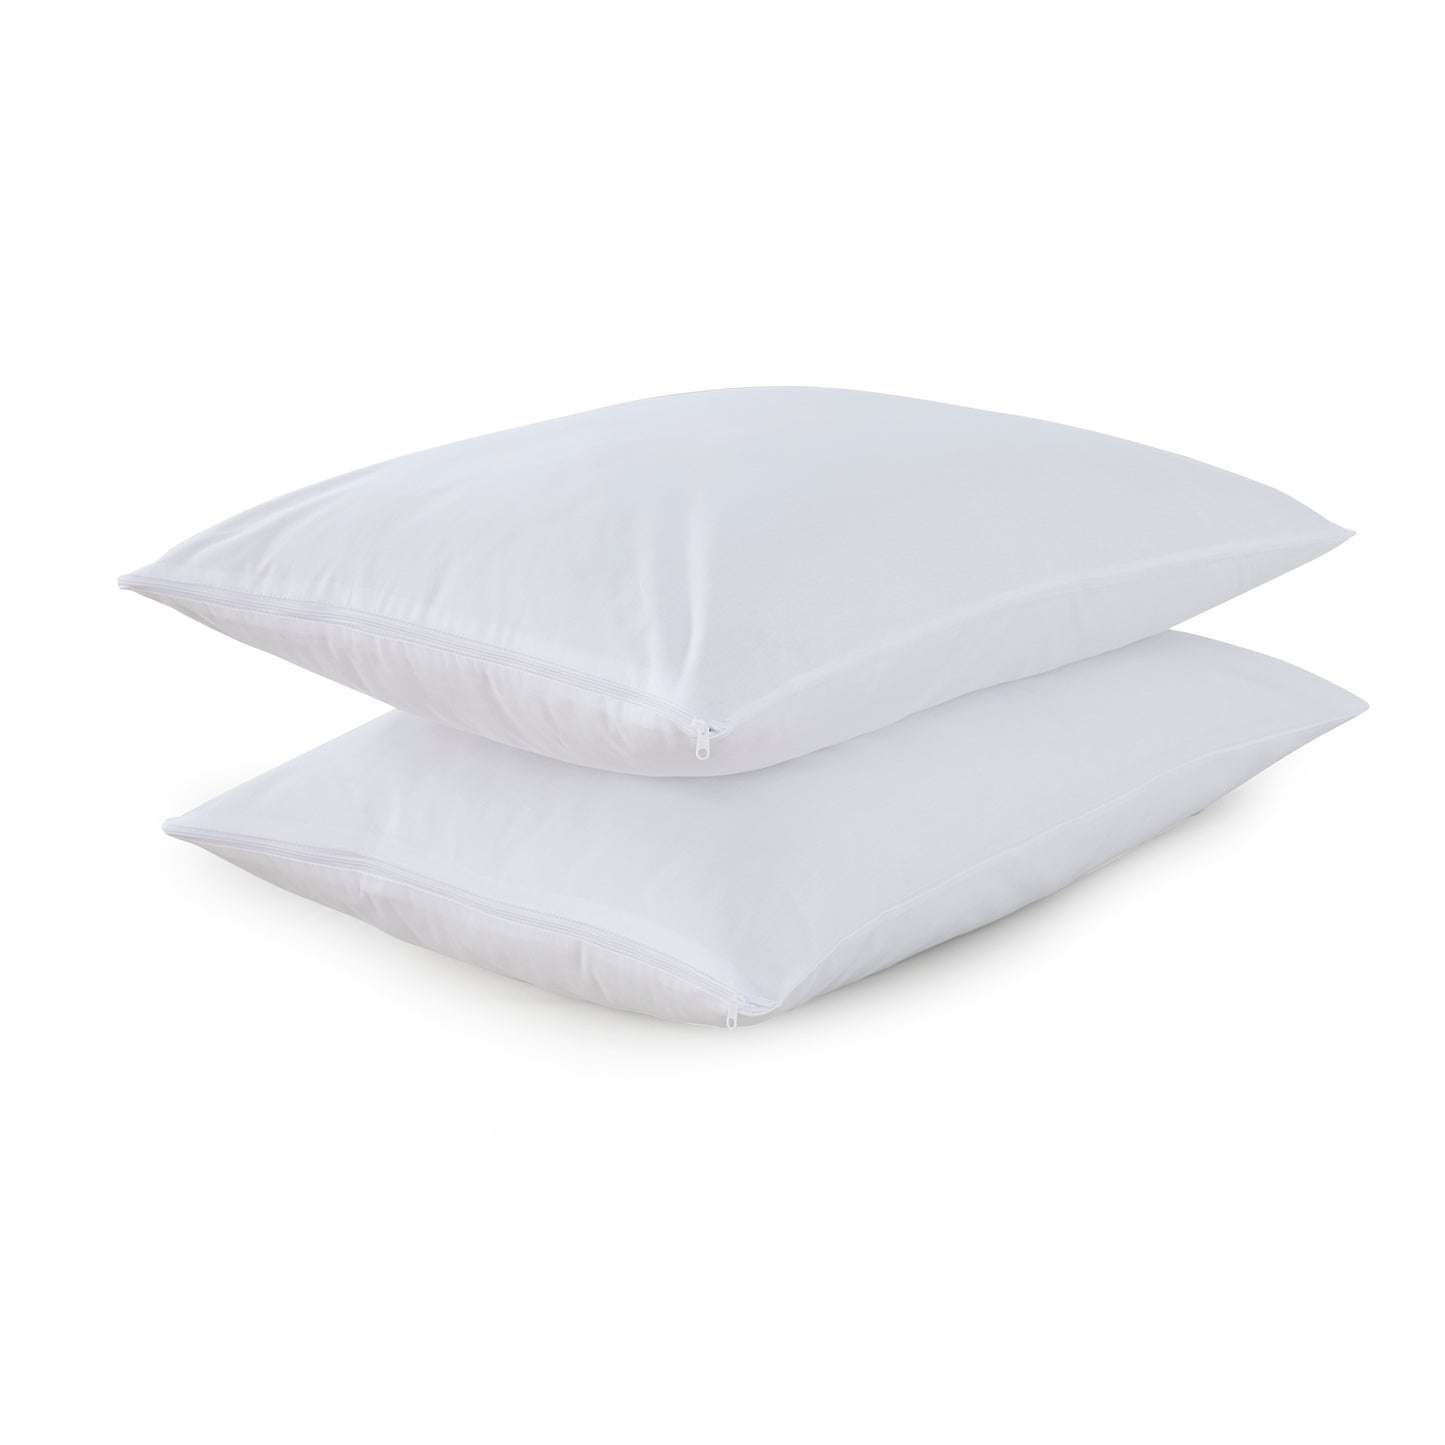 Pair of Pillow Protector Zipped Cotton Cover Washable Anti-Allergenic White Protector